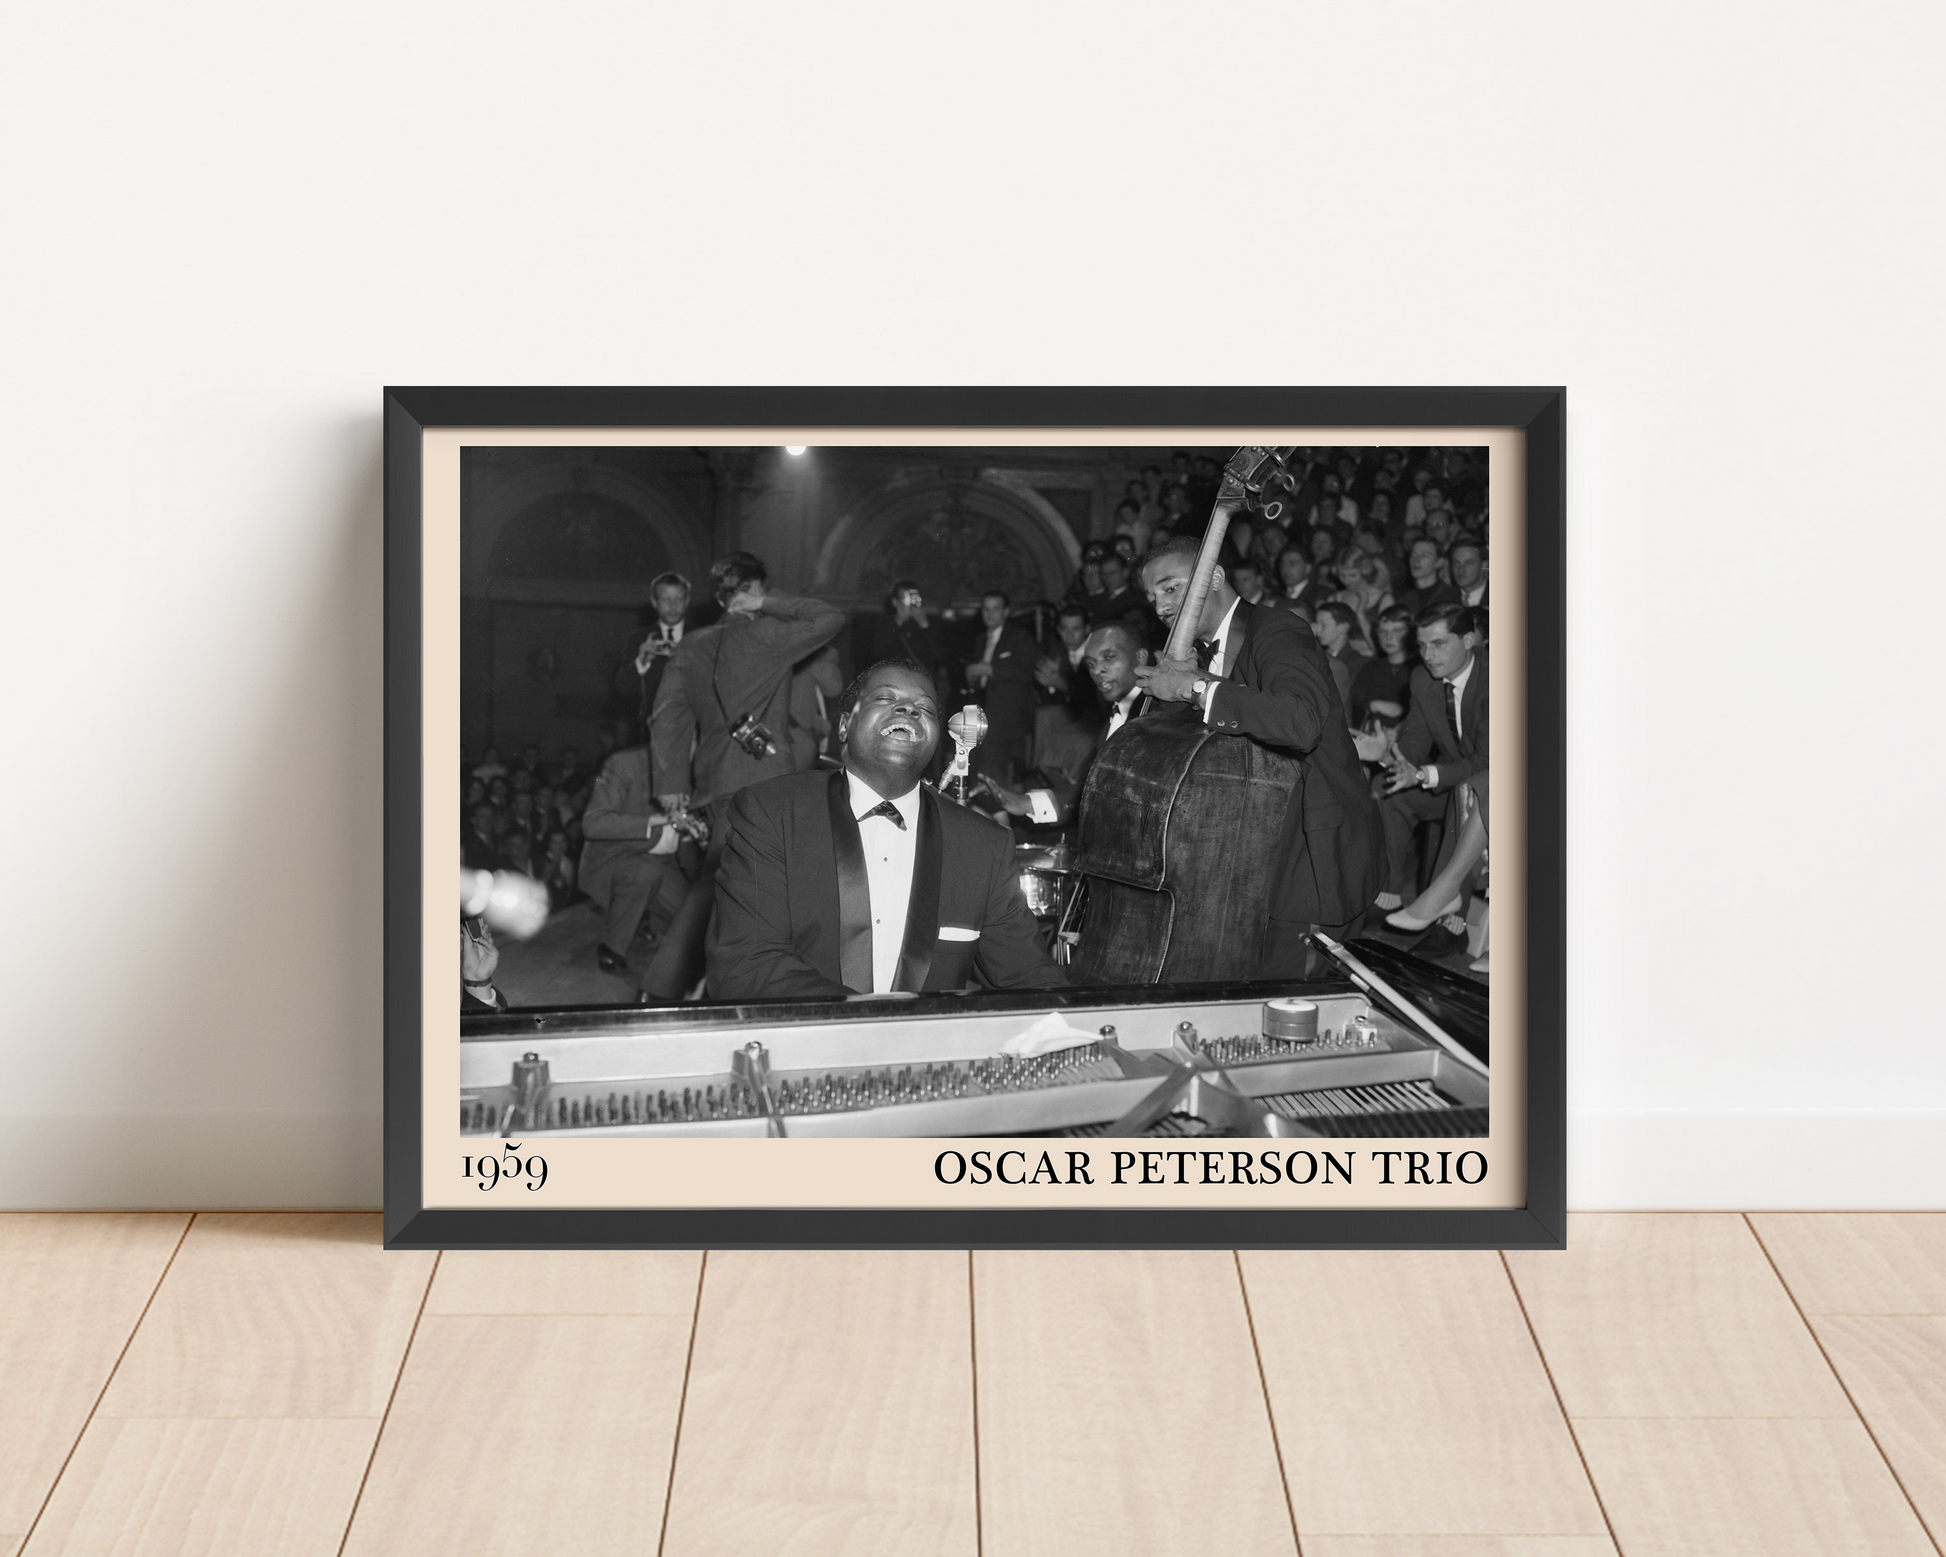 1959 picture of the Oscar Peterson Trio. Picture crafted into a black framed poster, with an off-white border. Poster is propped against a white wall